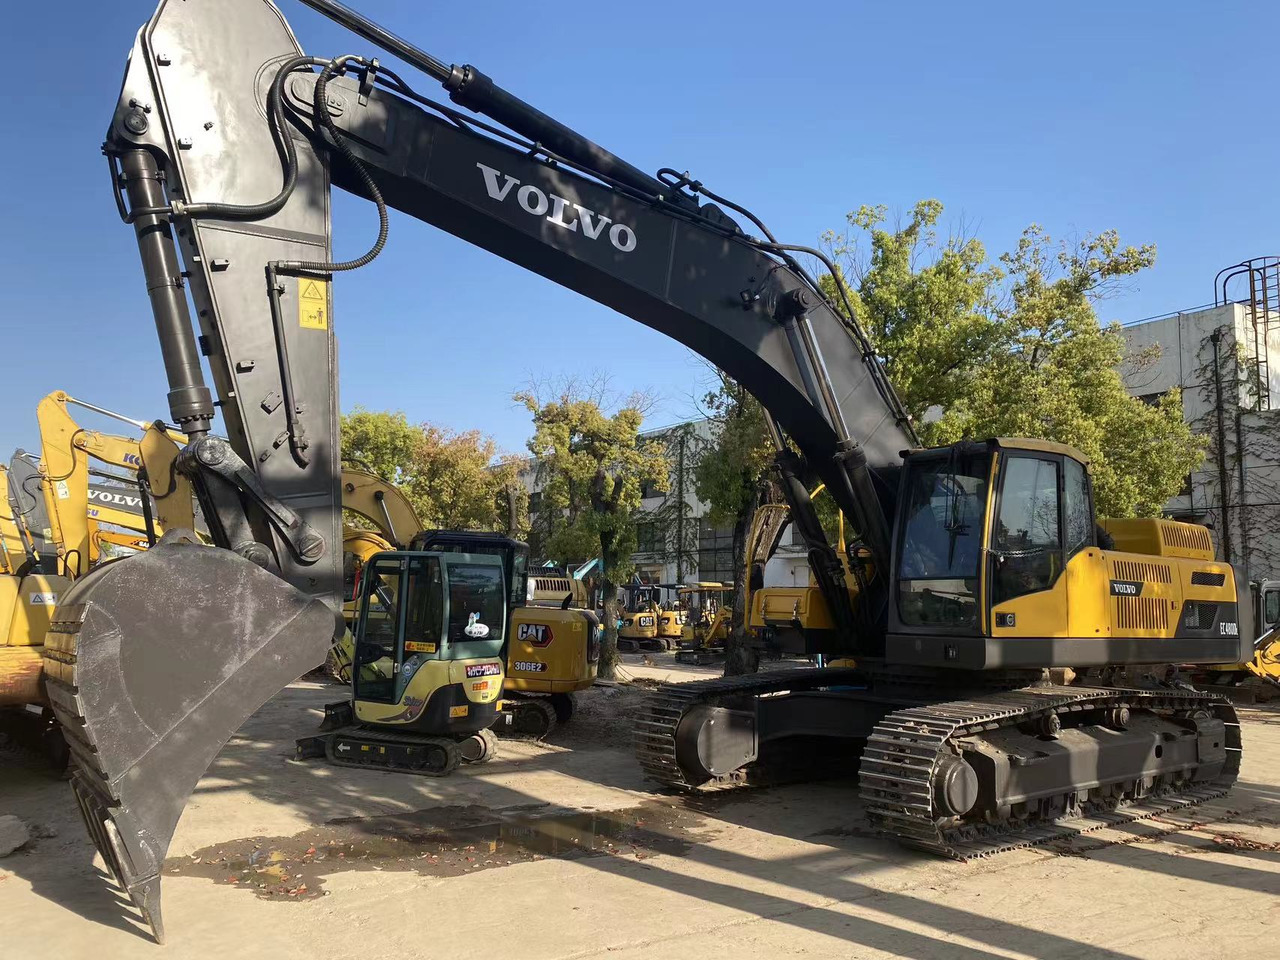 Hot selling original made Used excavator VOLVO EC480DL in stock low price for sale lizing Hot selling original made Used excavator VOLVO EC480DL in stock low price for sale: slika 5